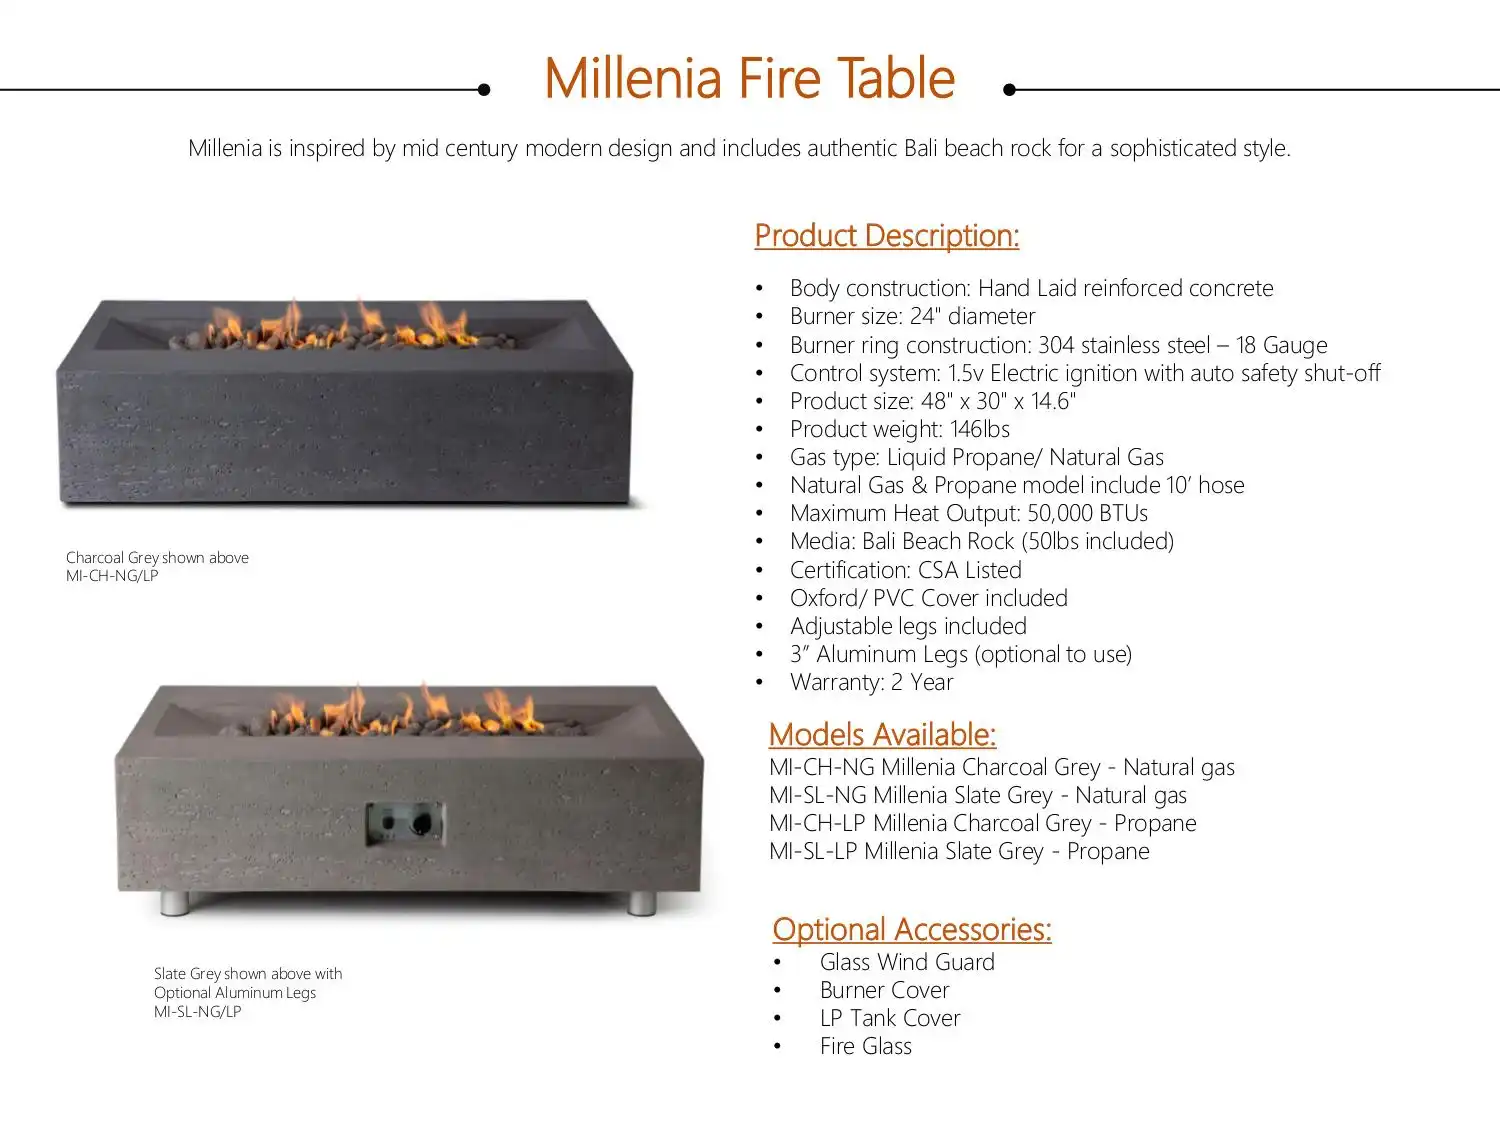 CL MILLENIA FIRE TABLE C$ 2,300 by Pyromania